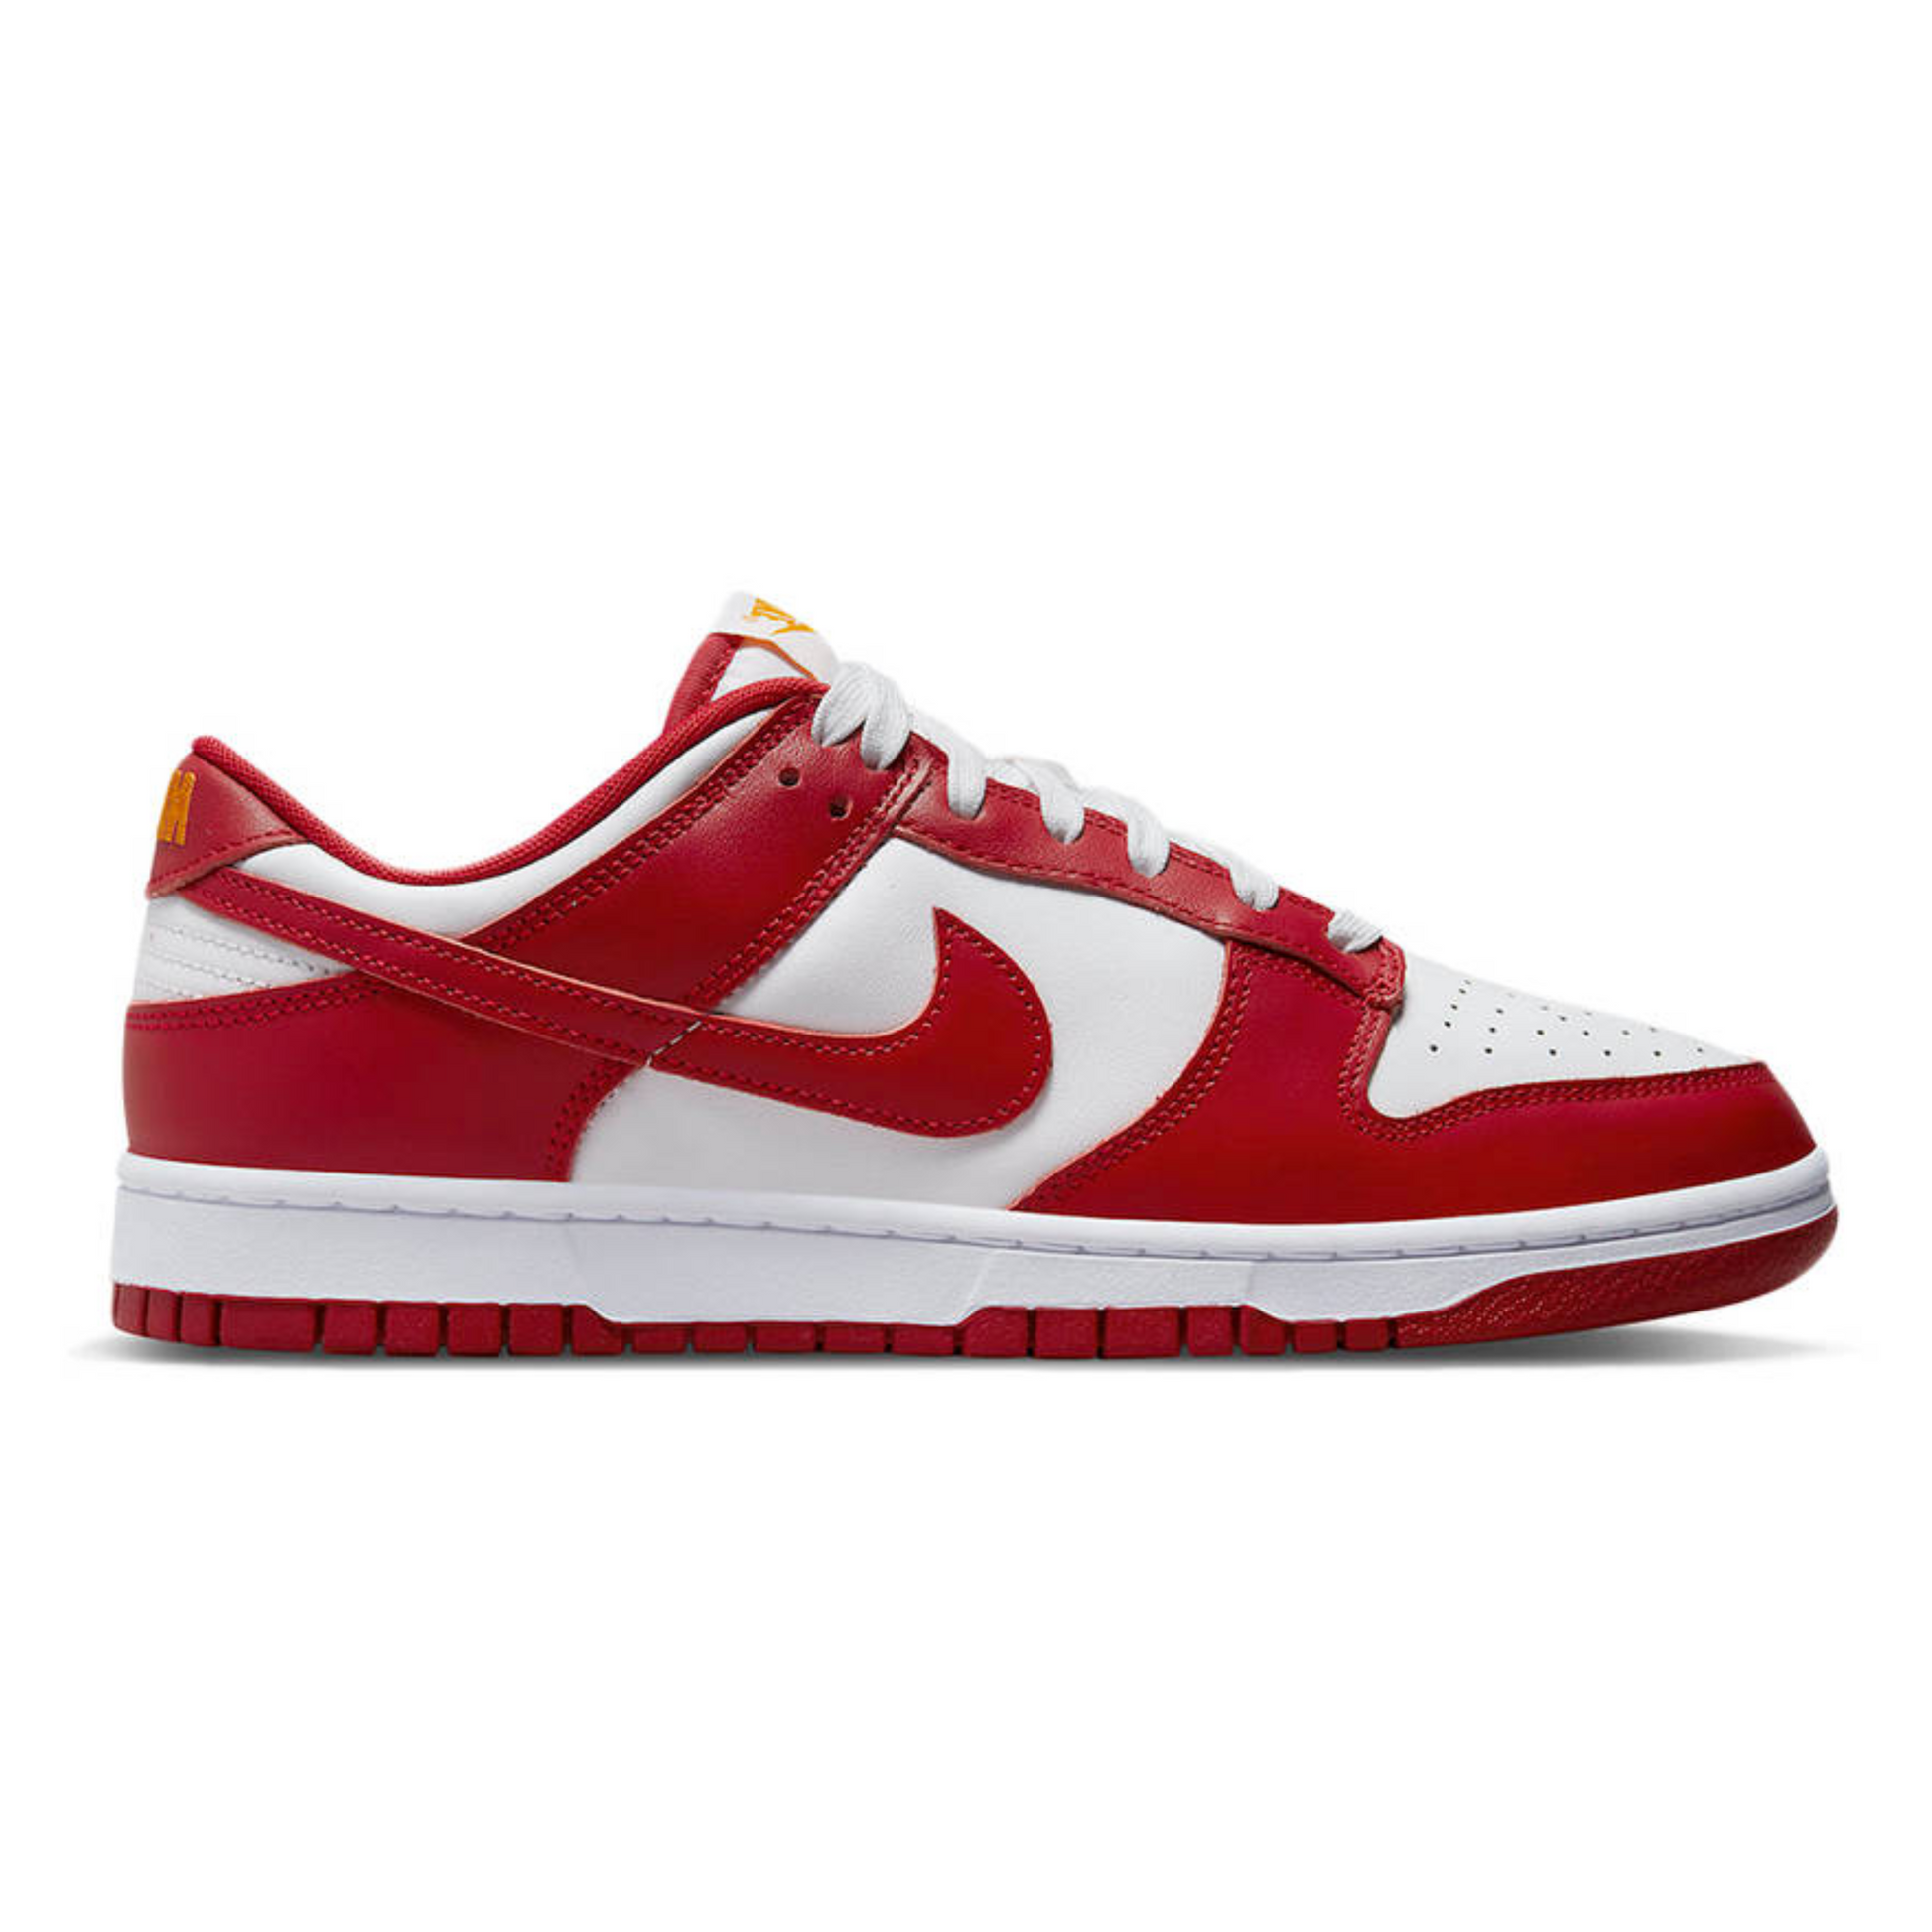 DD1391-602, Nike dunk low red white, USC gym red, sneakers